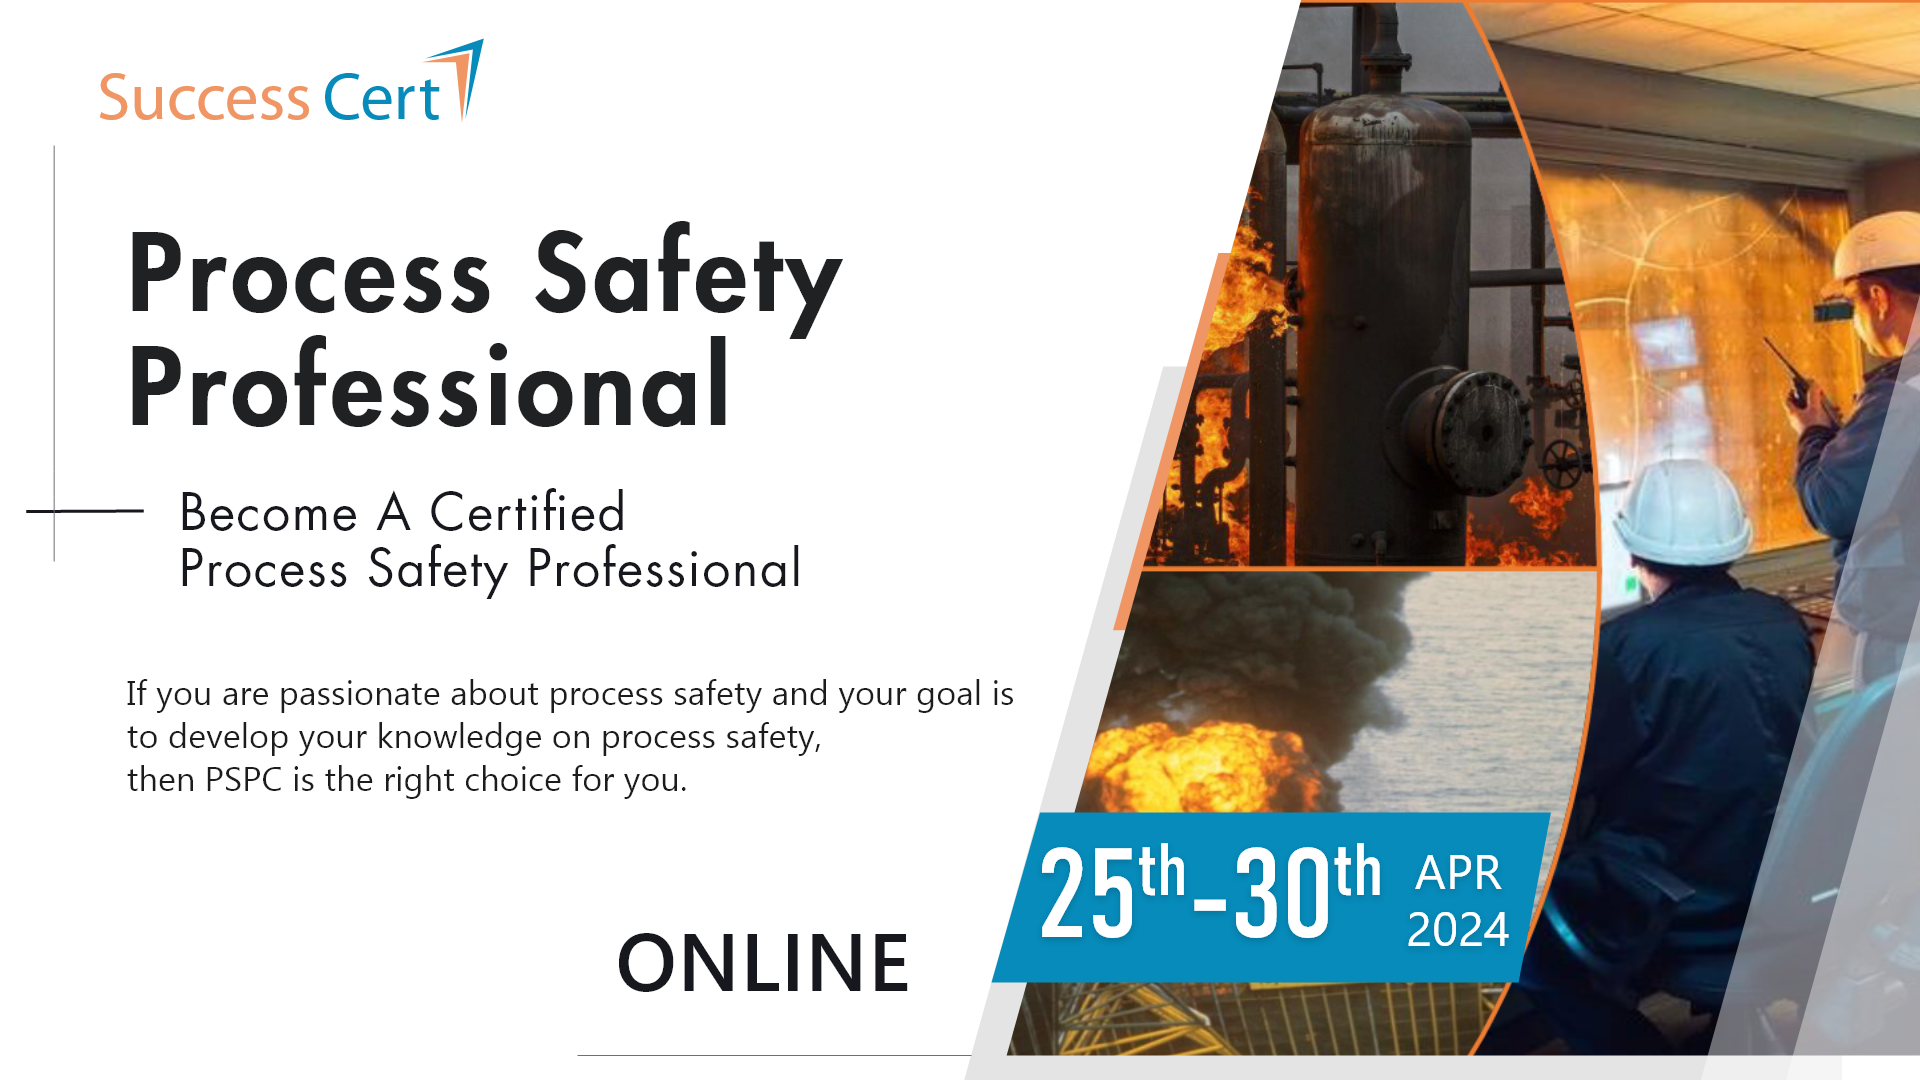 Process Safety Professional